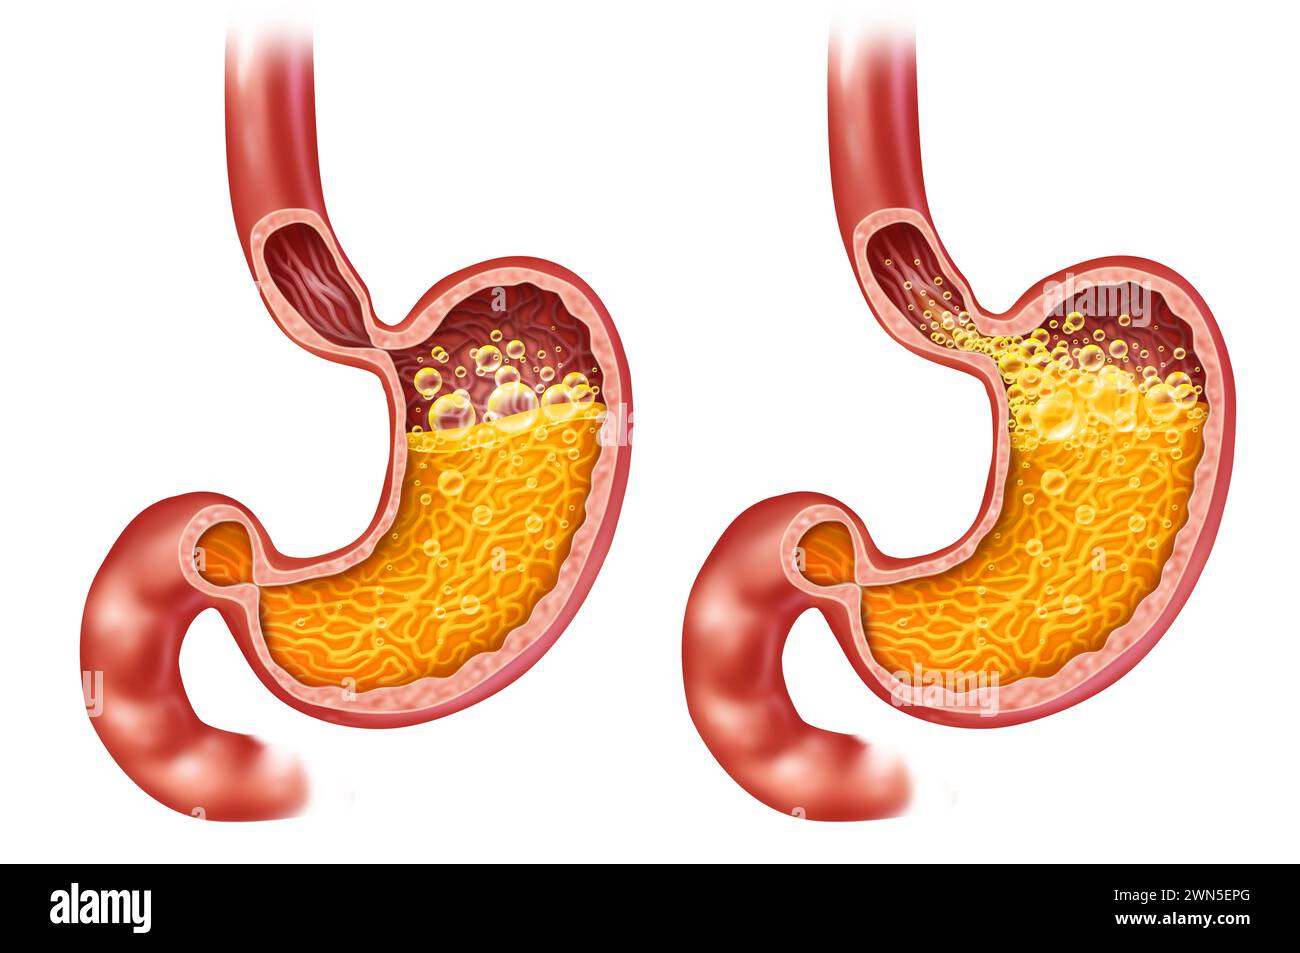 Acid Reflux And Heartburn or Gastroesophageal disease or GERD as an open sphincter with an iflamed esophagus as a medical symbol for regurgitation Stock Photo